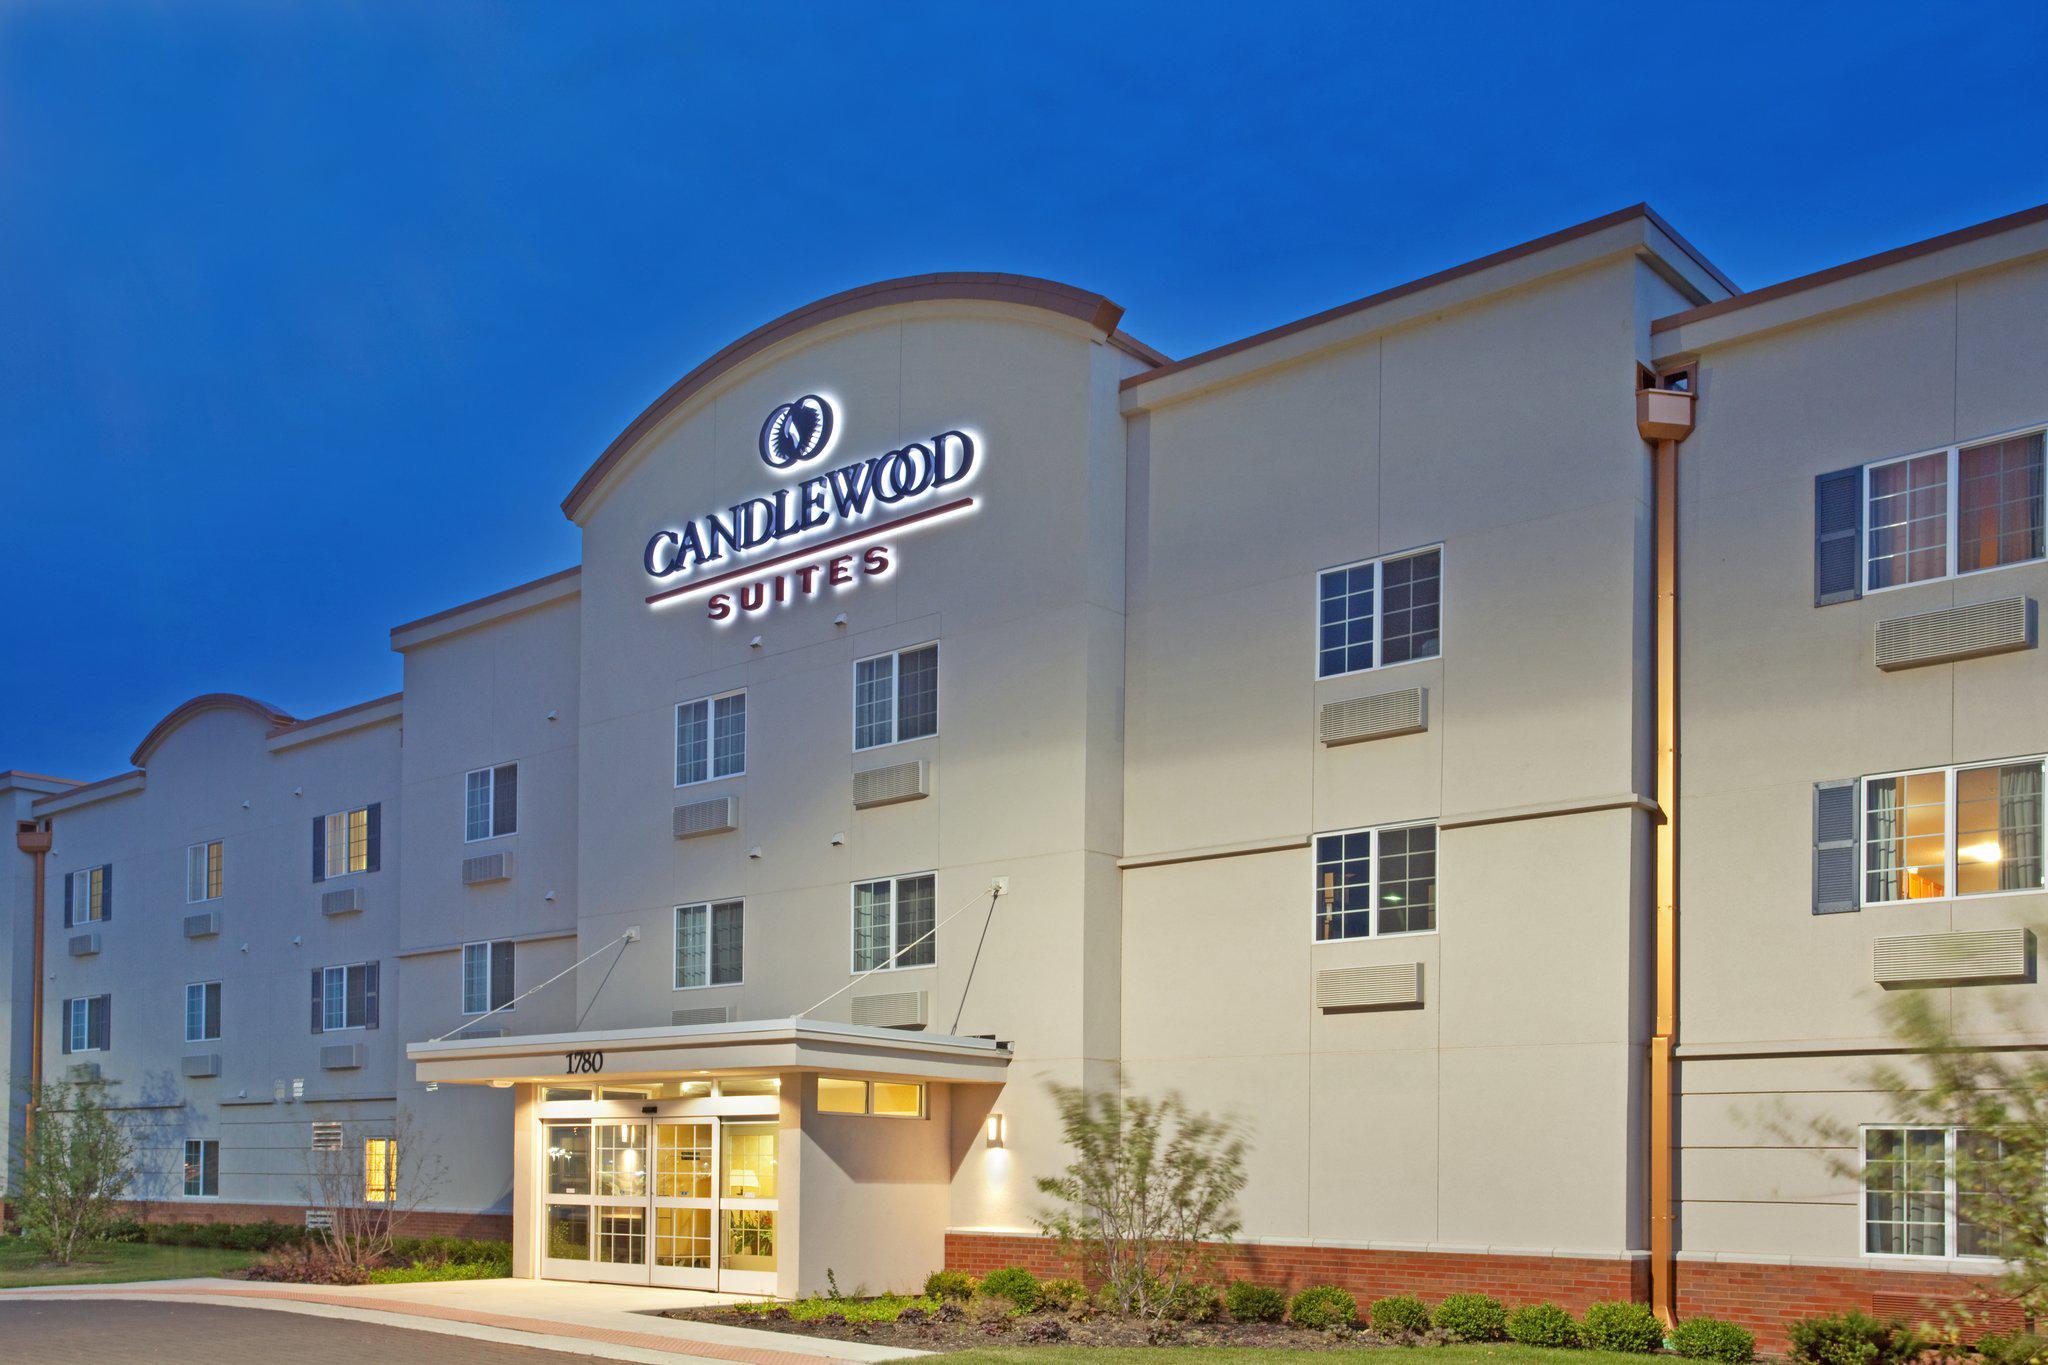 Candlewood Suites Elgin NW-Chicago Photo